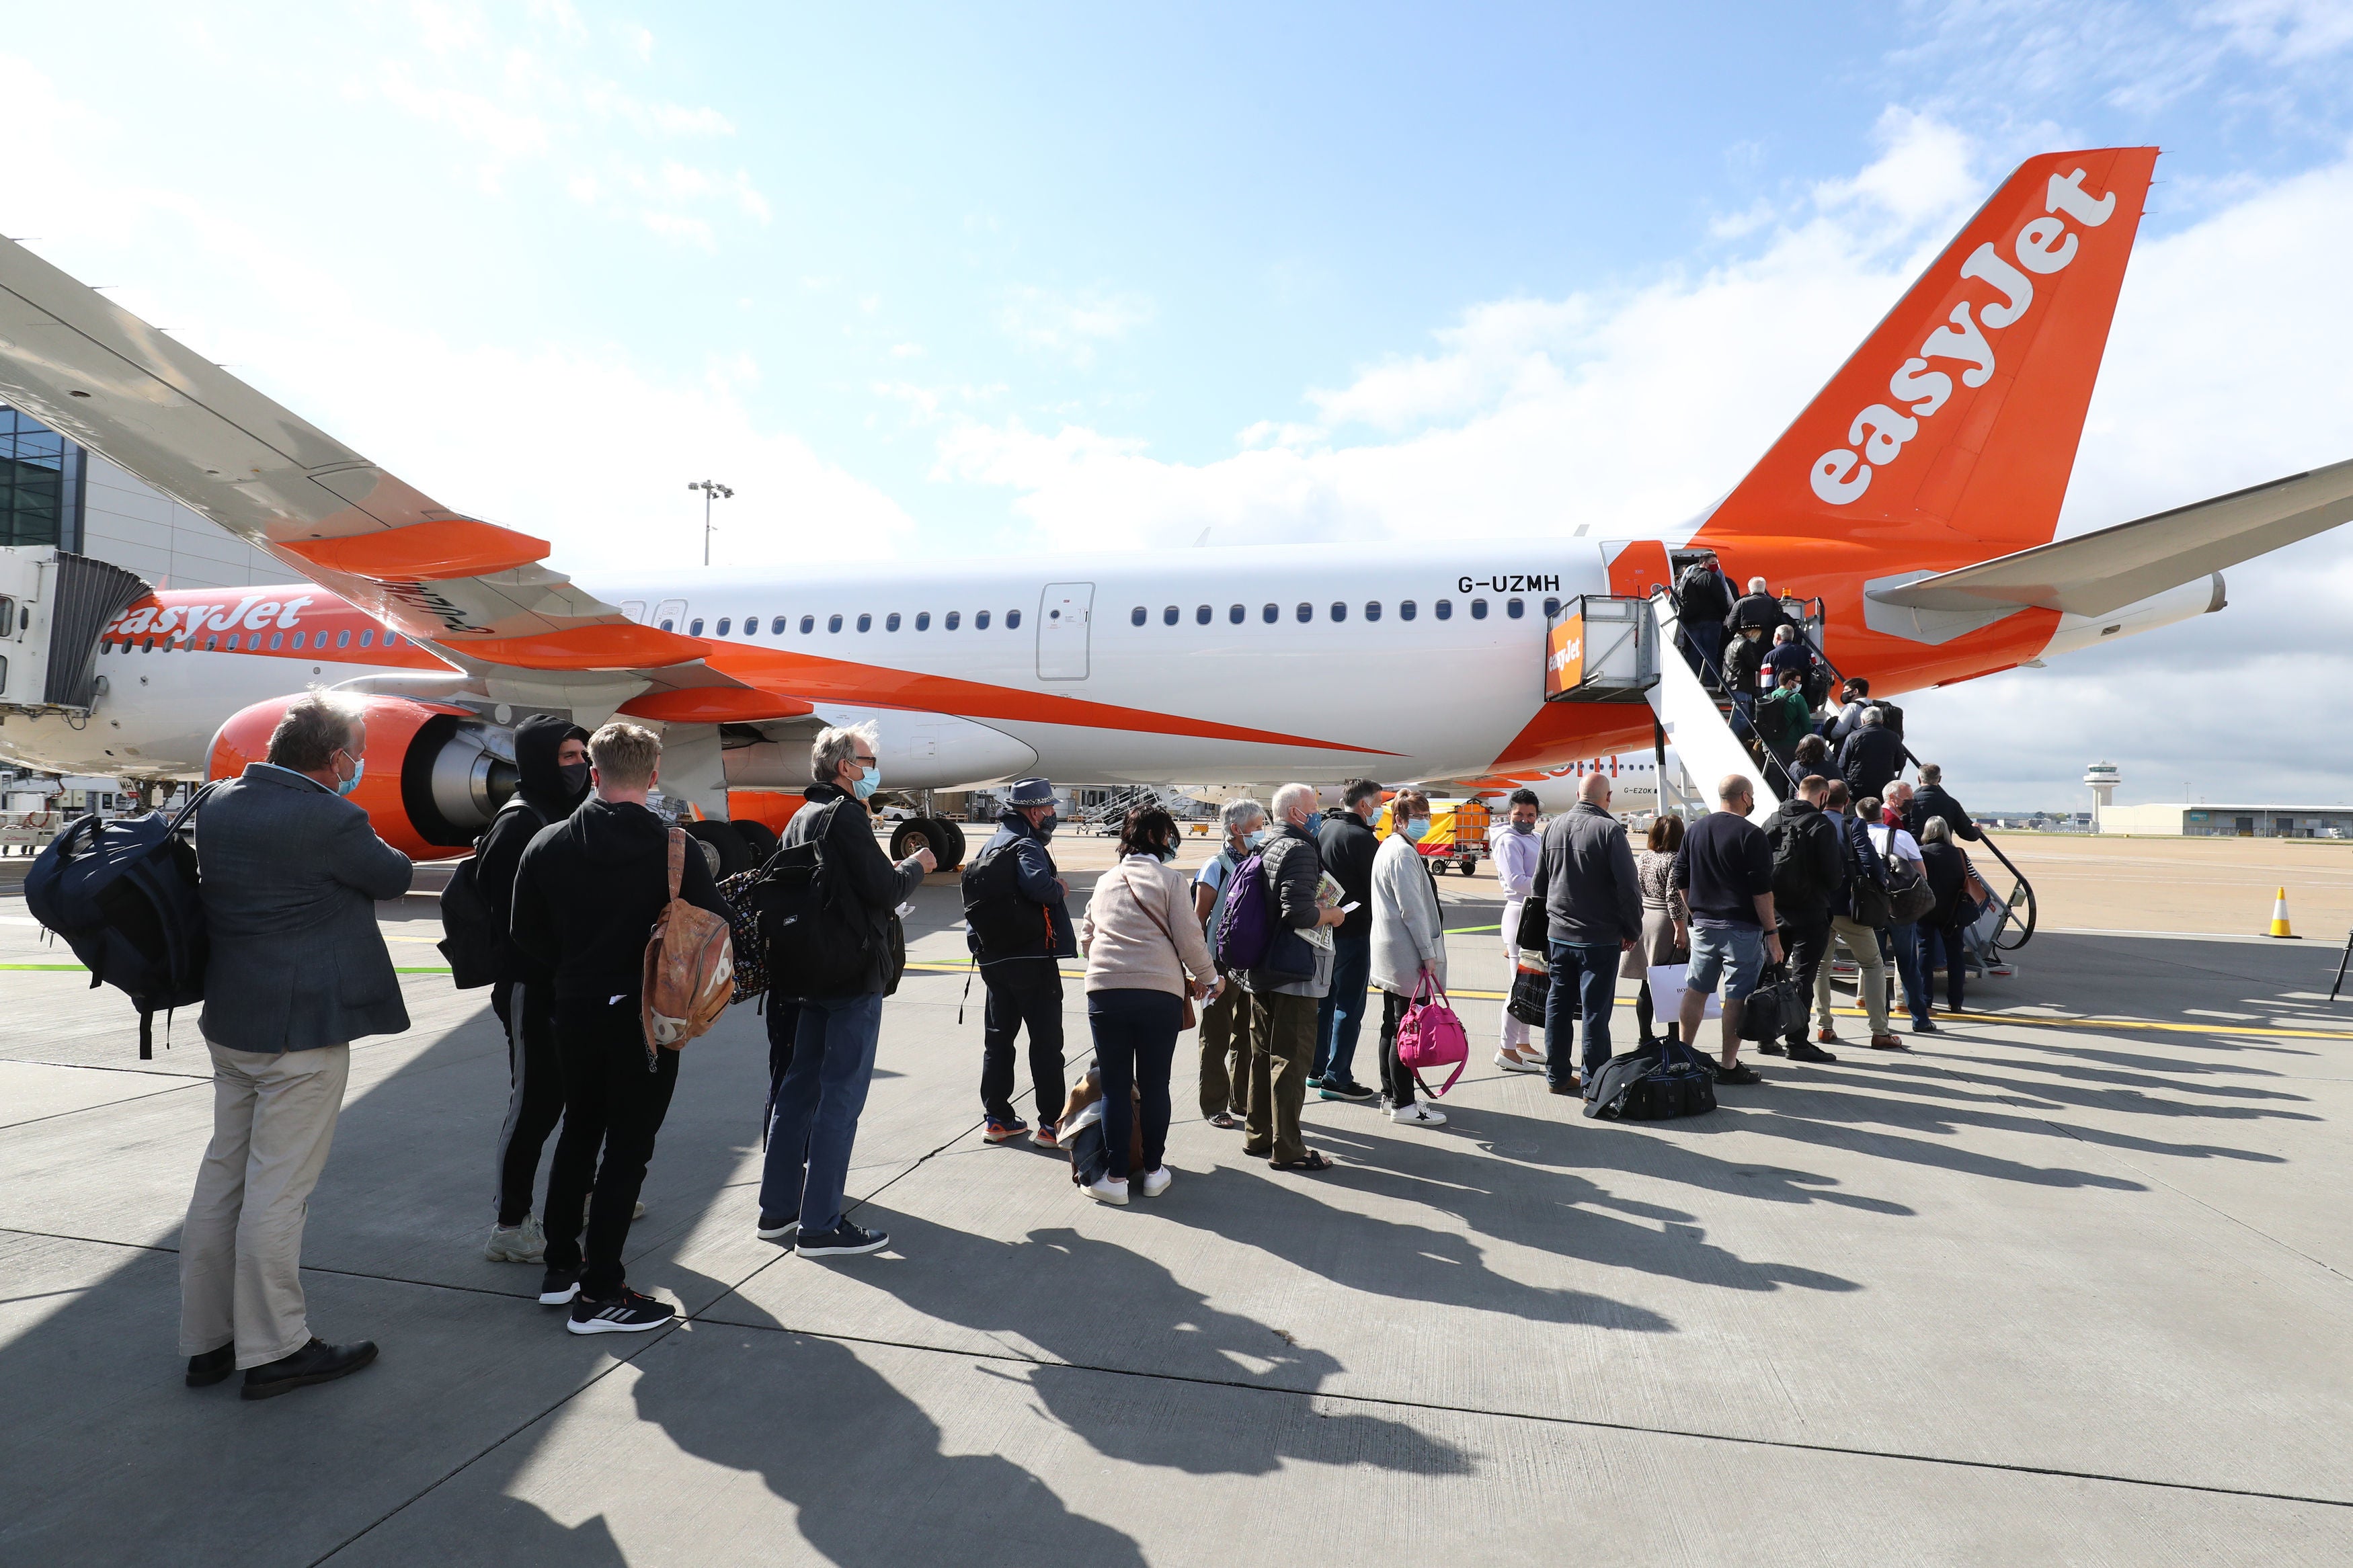 easyJet and Tui have both cancelled flights after passengers had boarded the aircraft